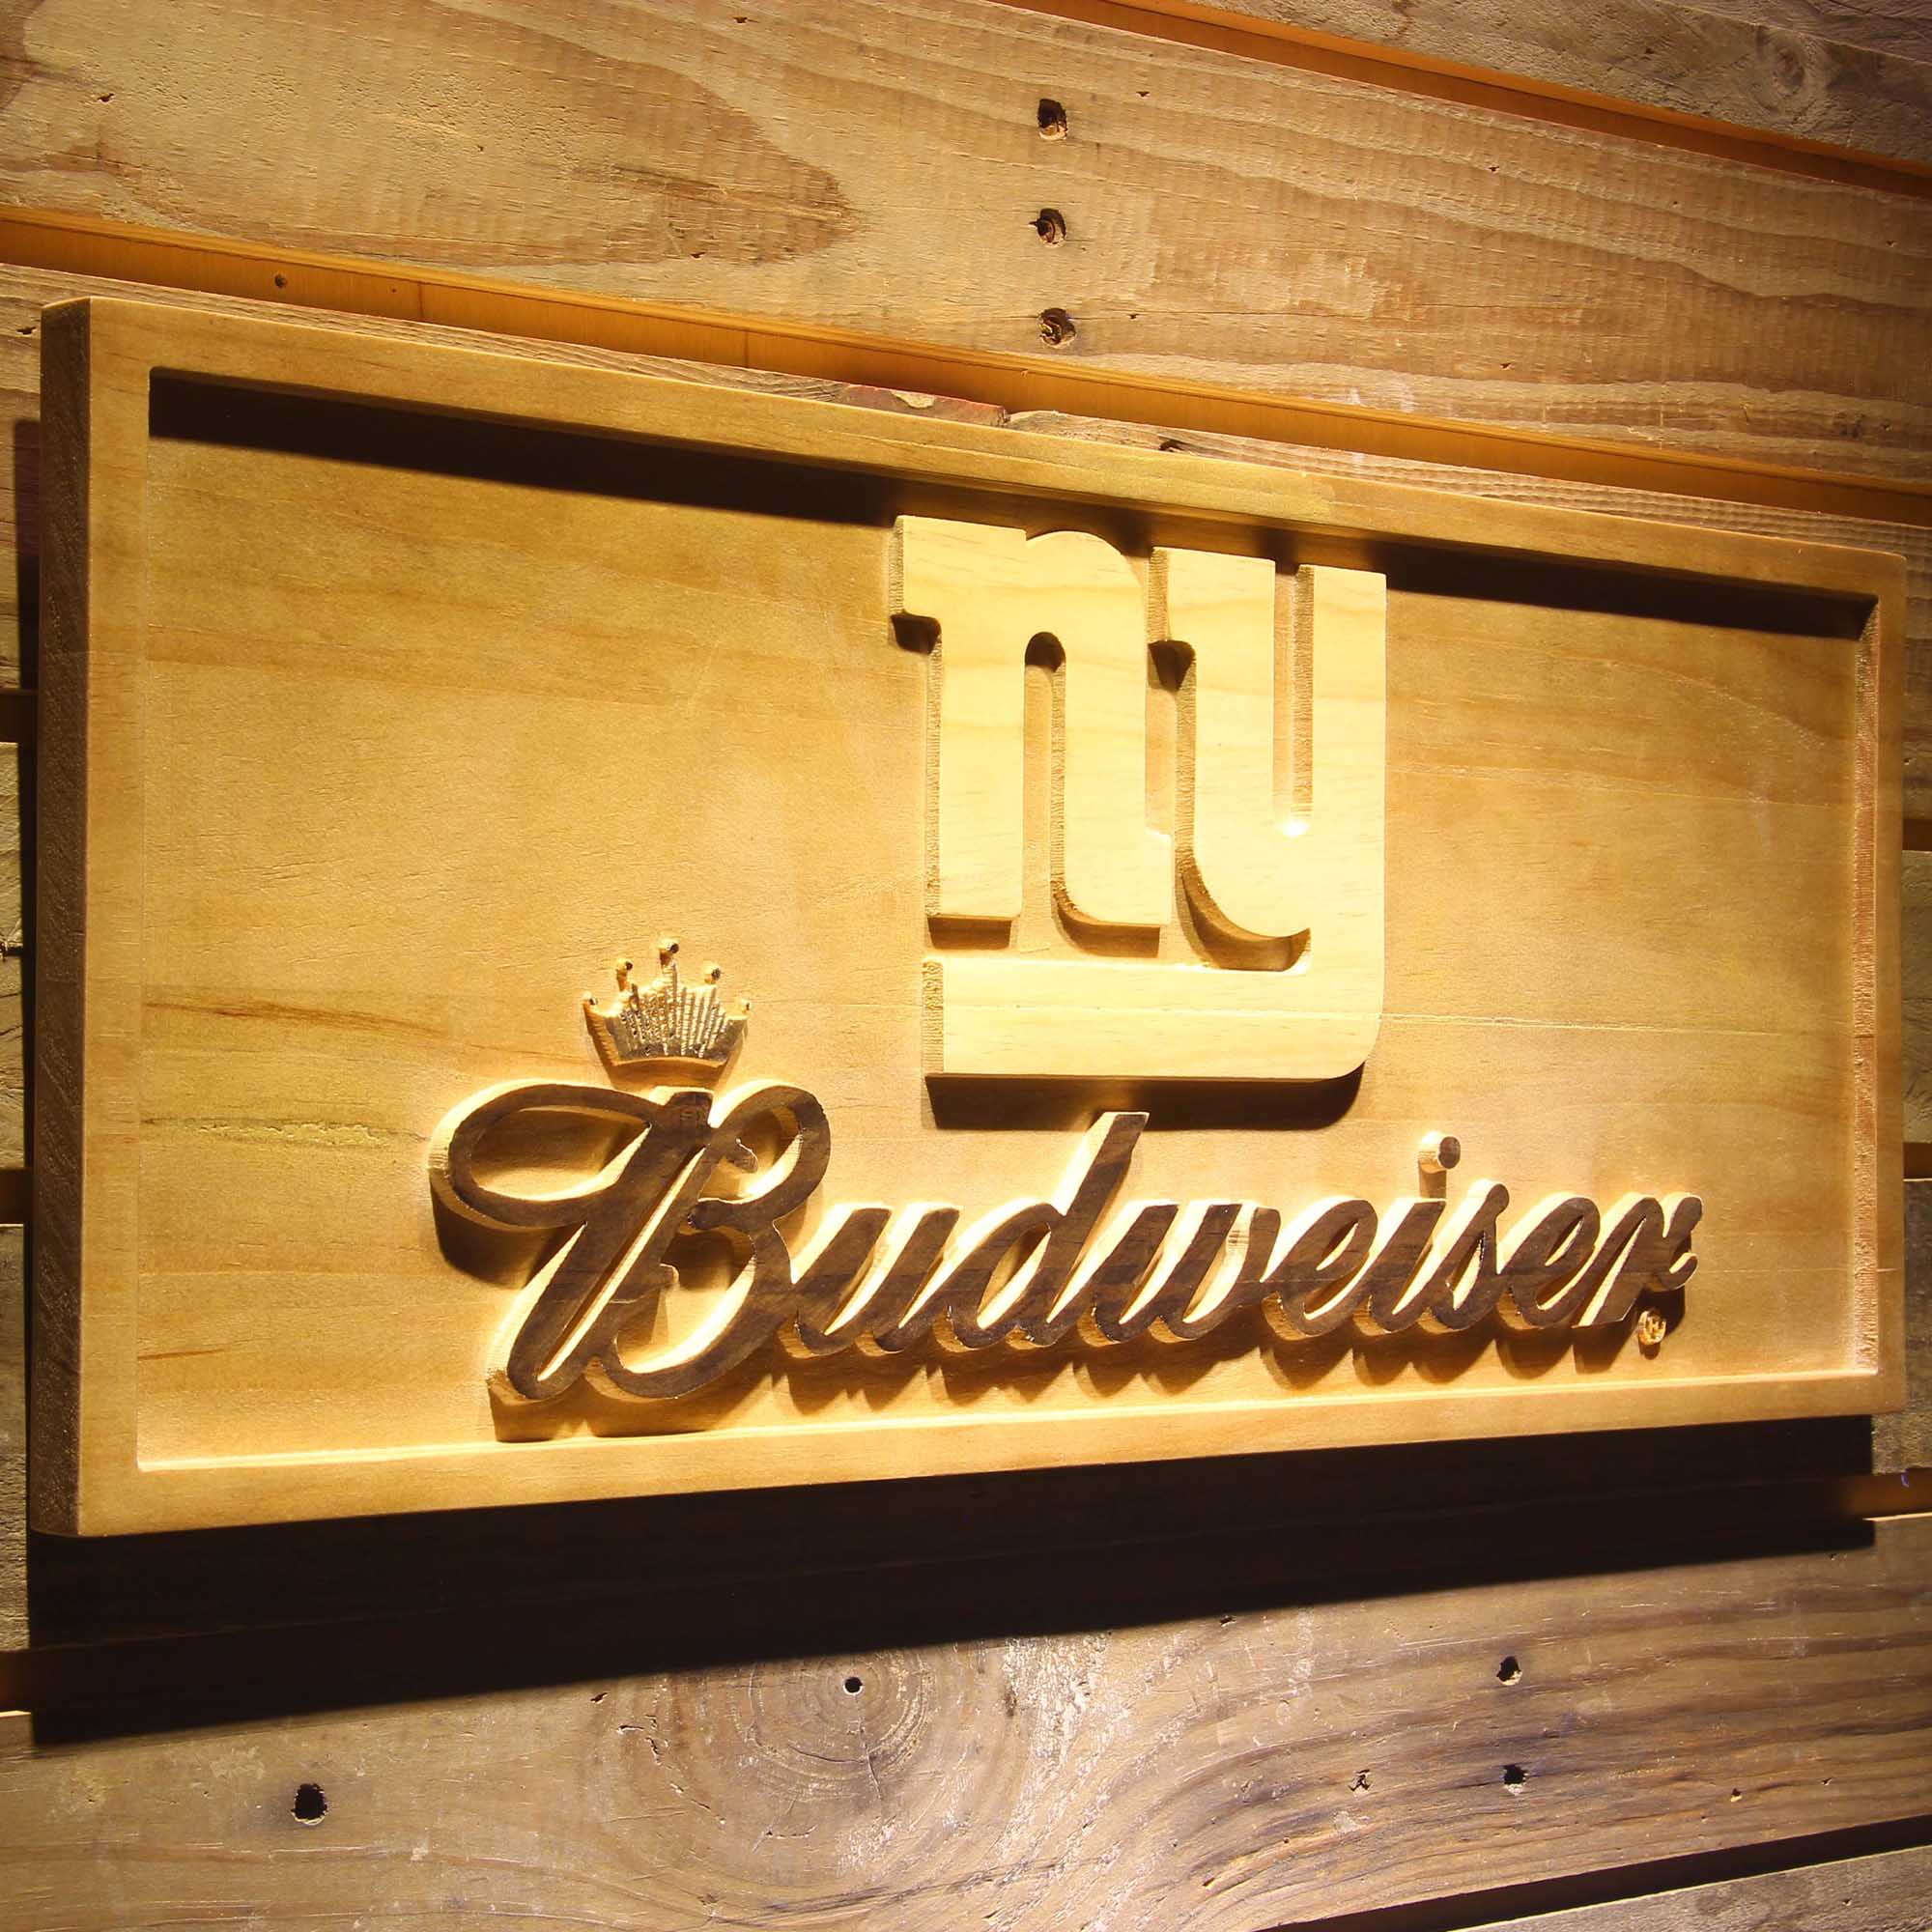 New York Giants Budweiser 3D Solid Wooden Craving Sign